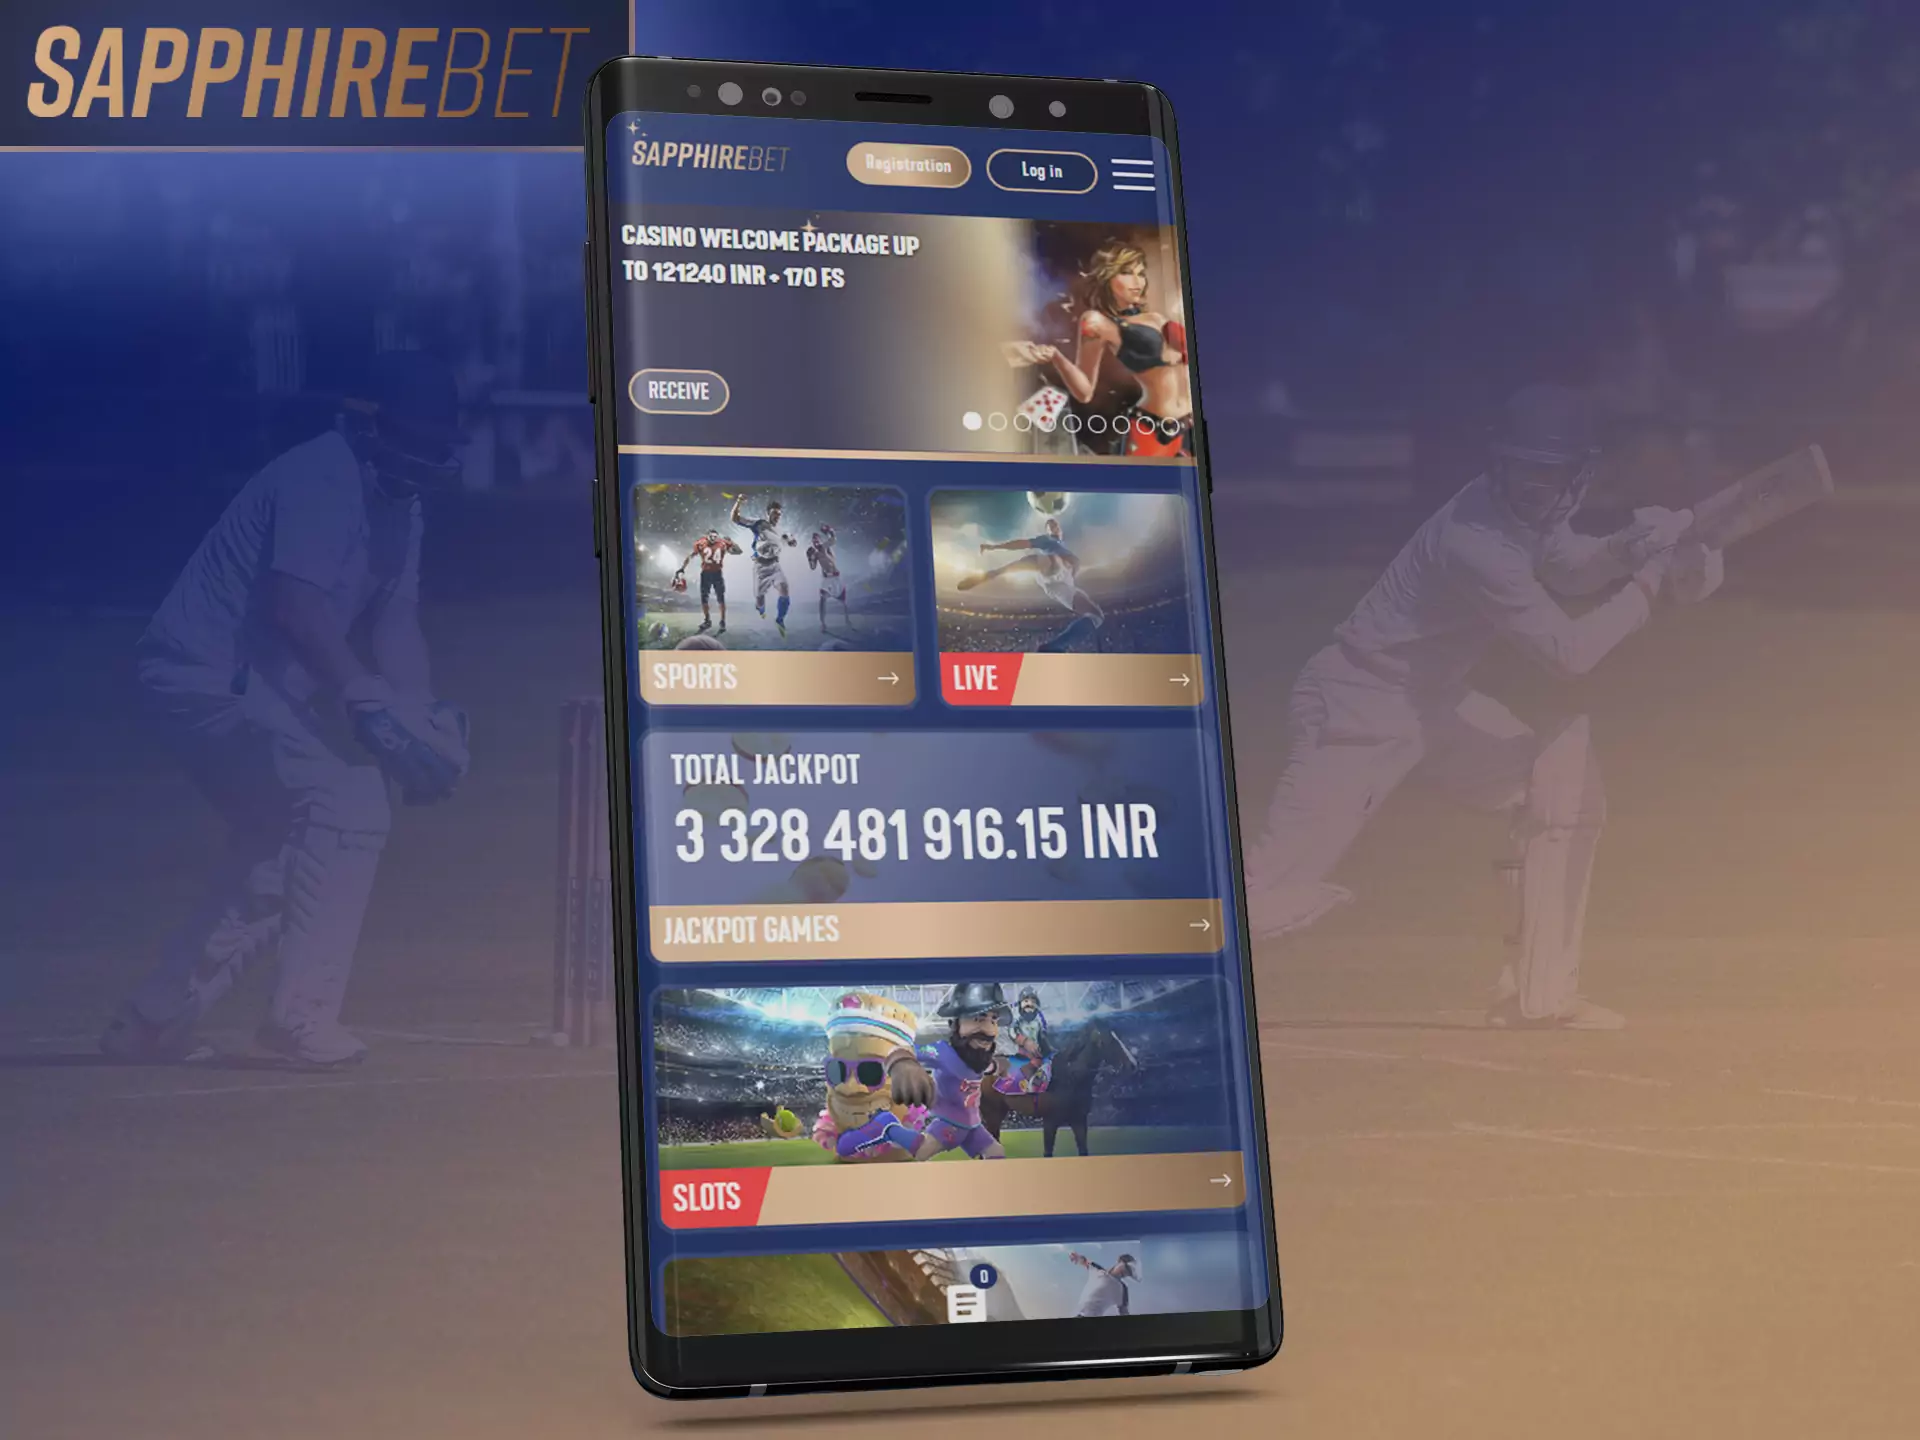 Use all the functions of Sapphirebet on your mobile device through the mobile version of the site.